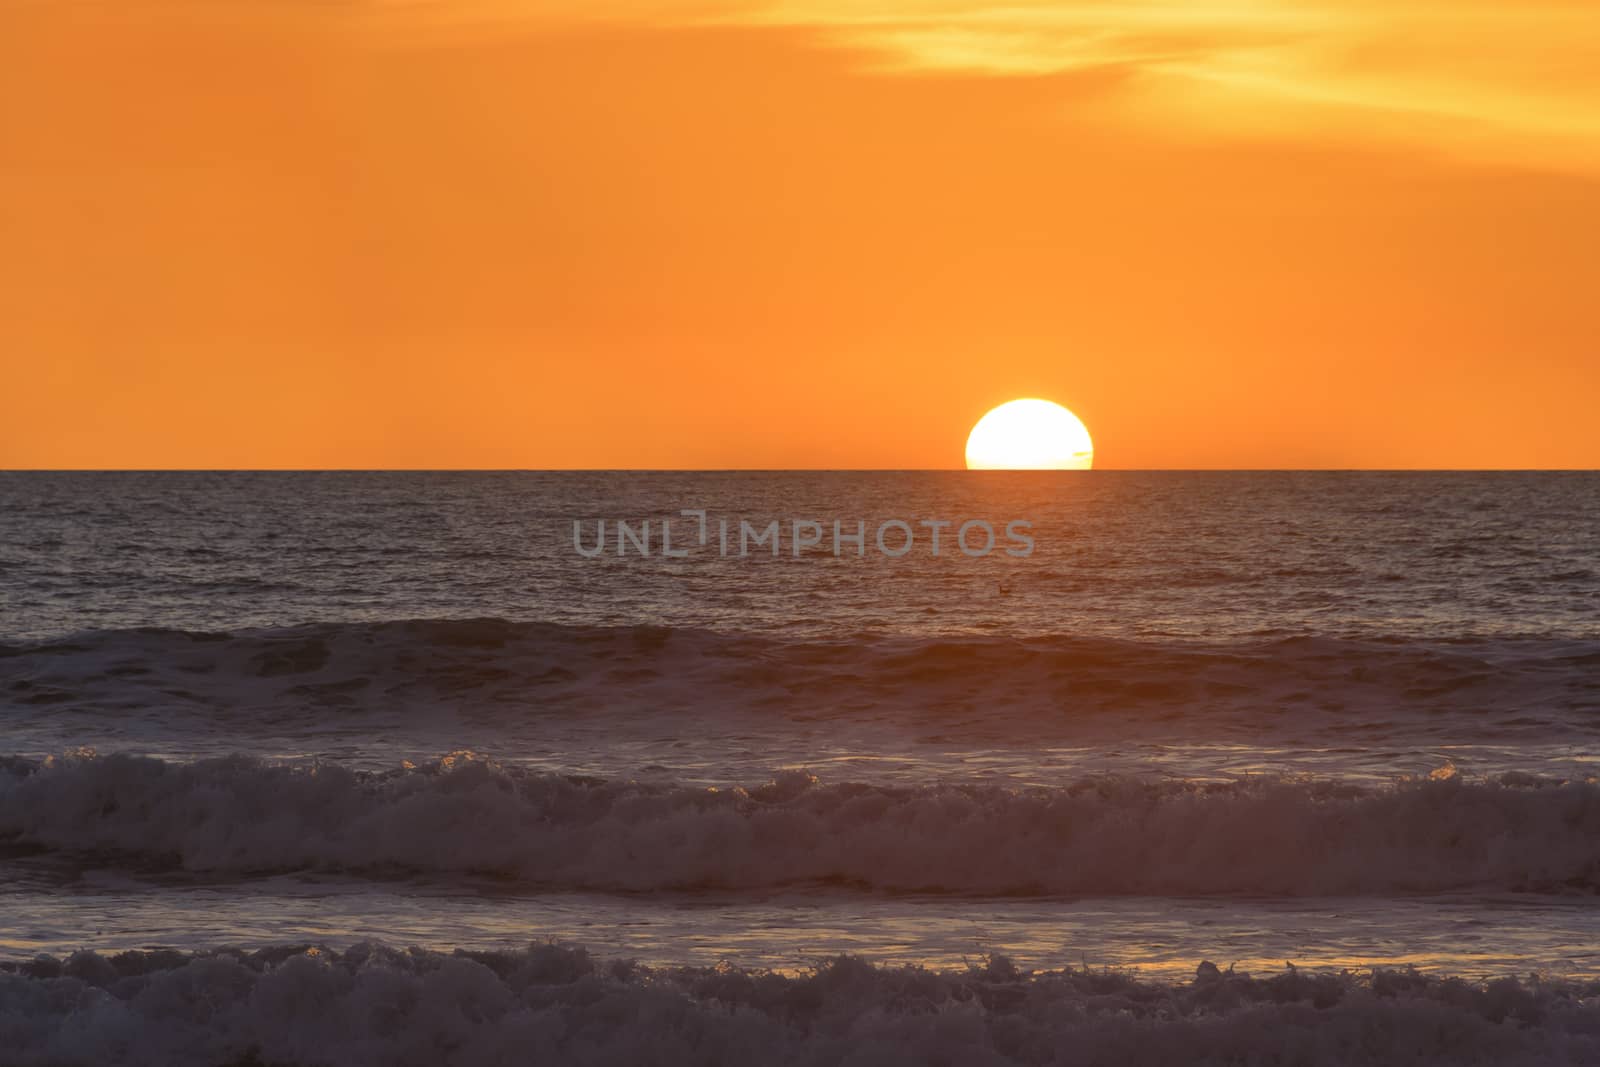 Sunset over Pacific Ocean seen from San Diego, California, USA